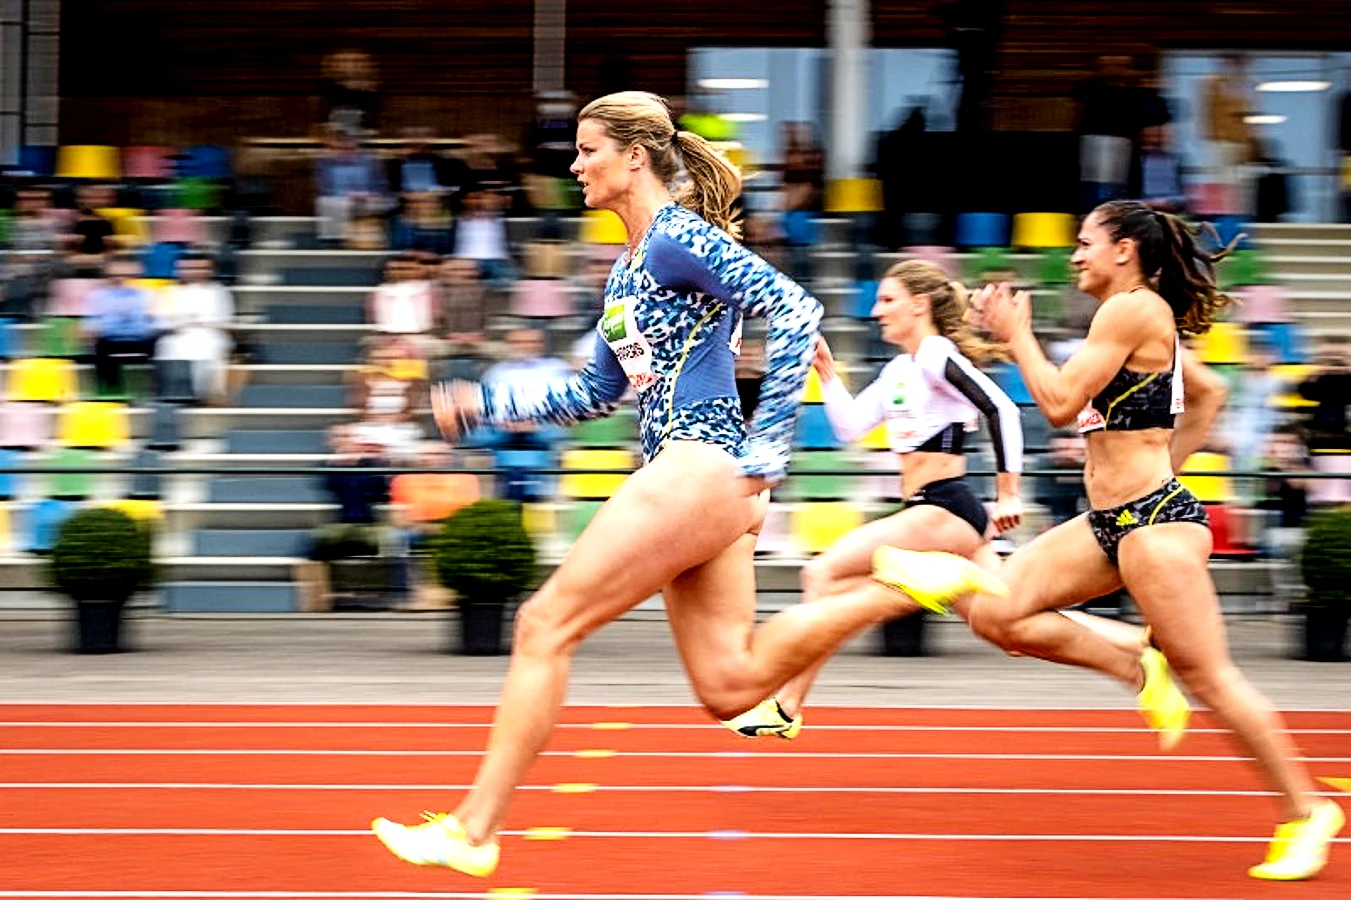 Dafne Schippers in action at the Fanny Blankers-Koen Games